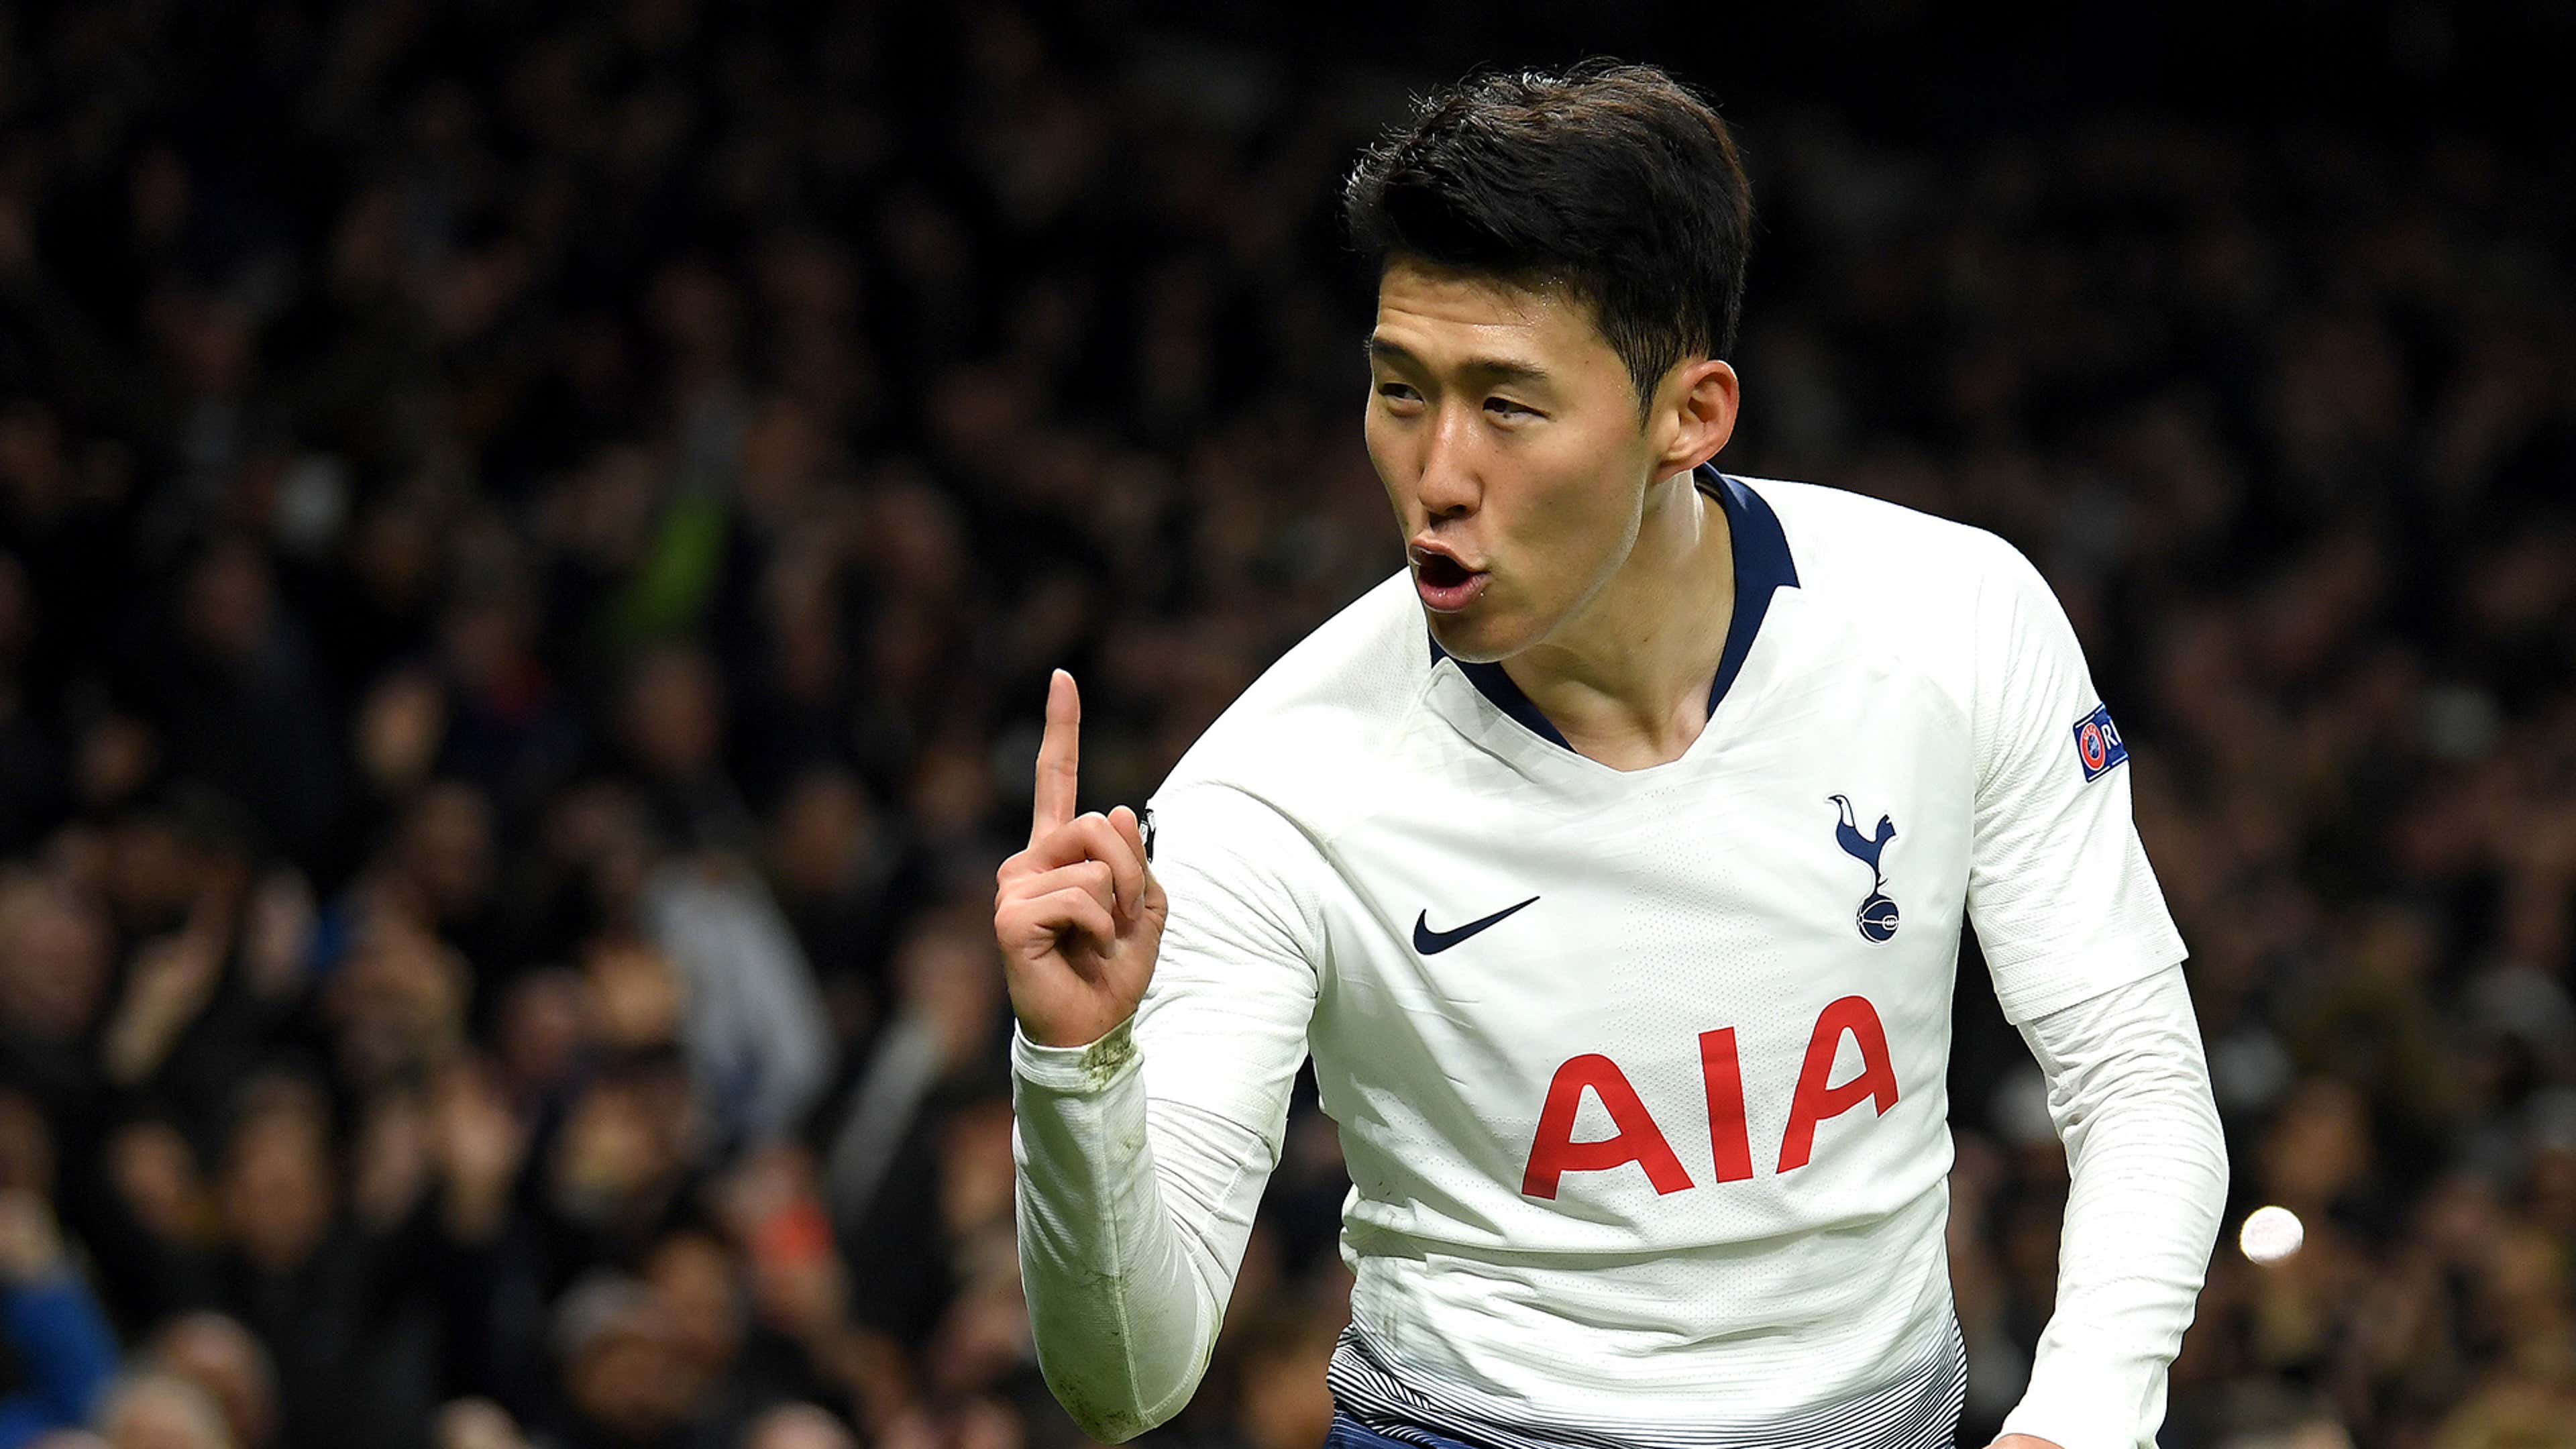 Tottenham star Son Heung-min becomes one year younger overnight